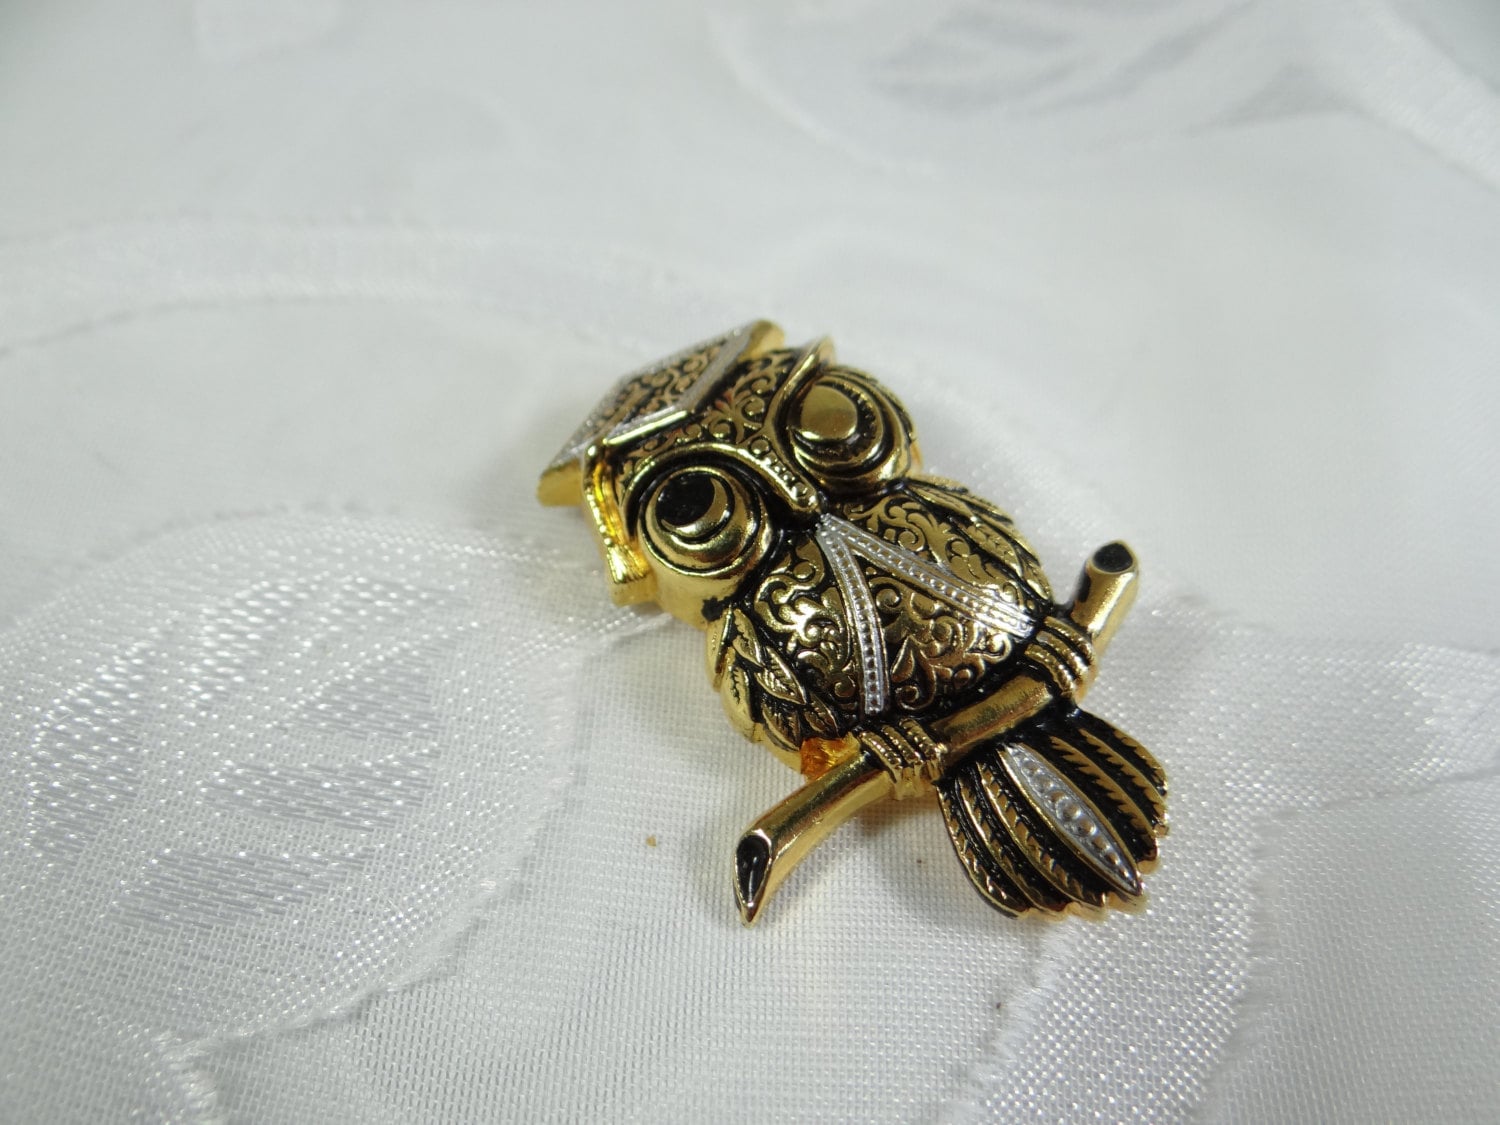 Silver and Gold Tone Winking Owl Brooch Pin - Graduate Owl on a Branch - Antiqued Gold Owl Brooch Pi